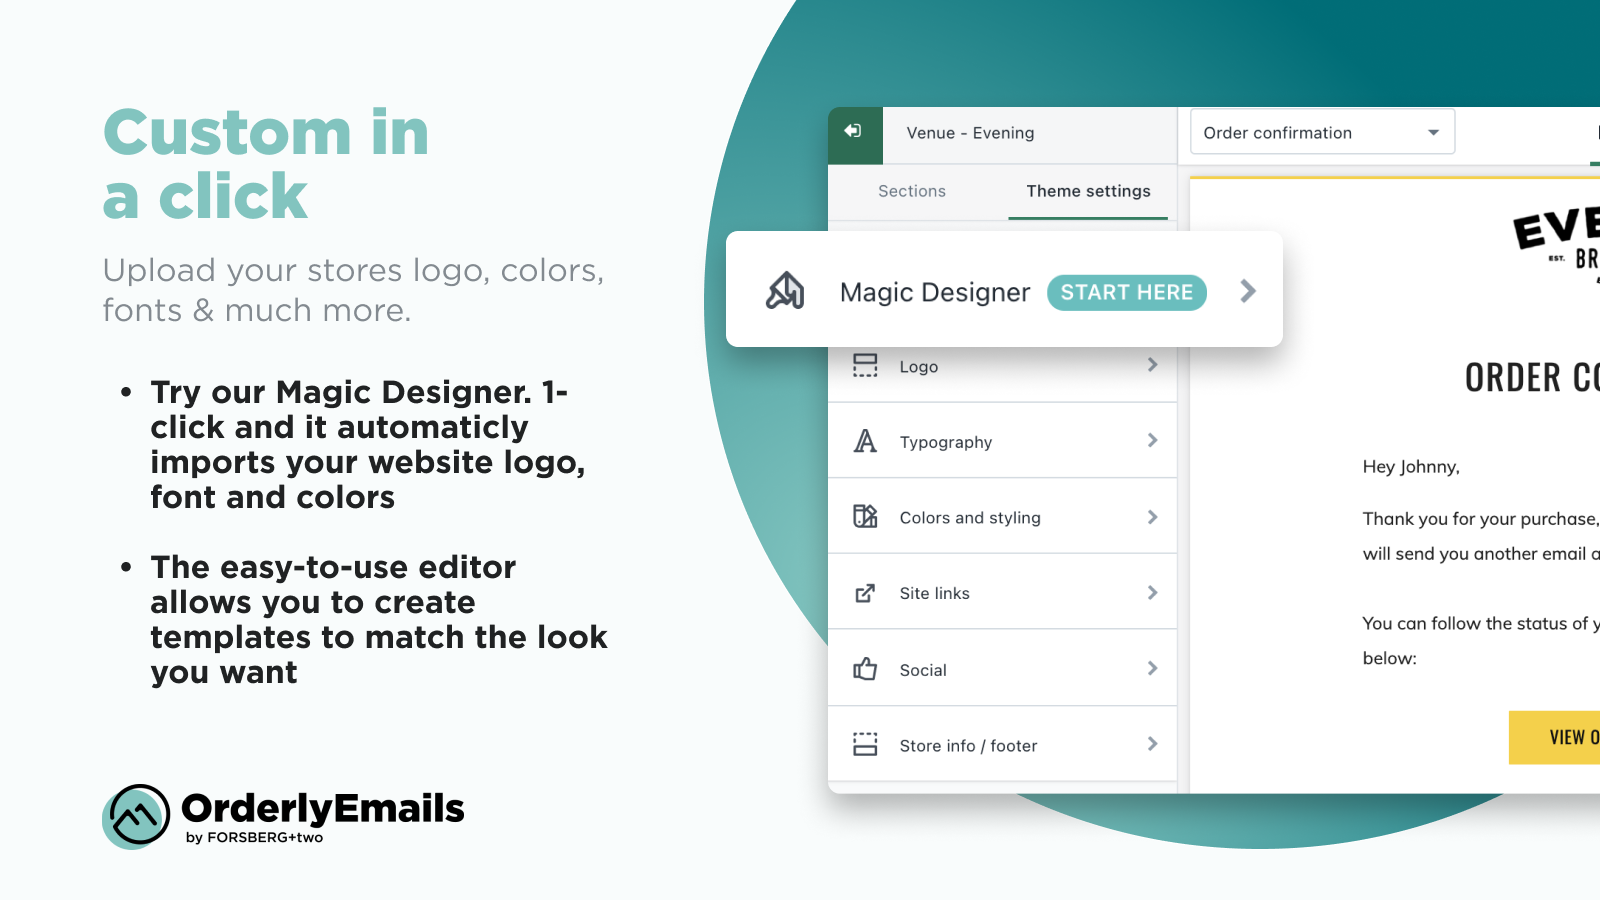 OrderlyEmails: Custom email templates in a click